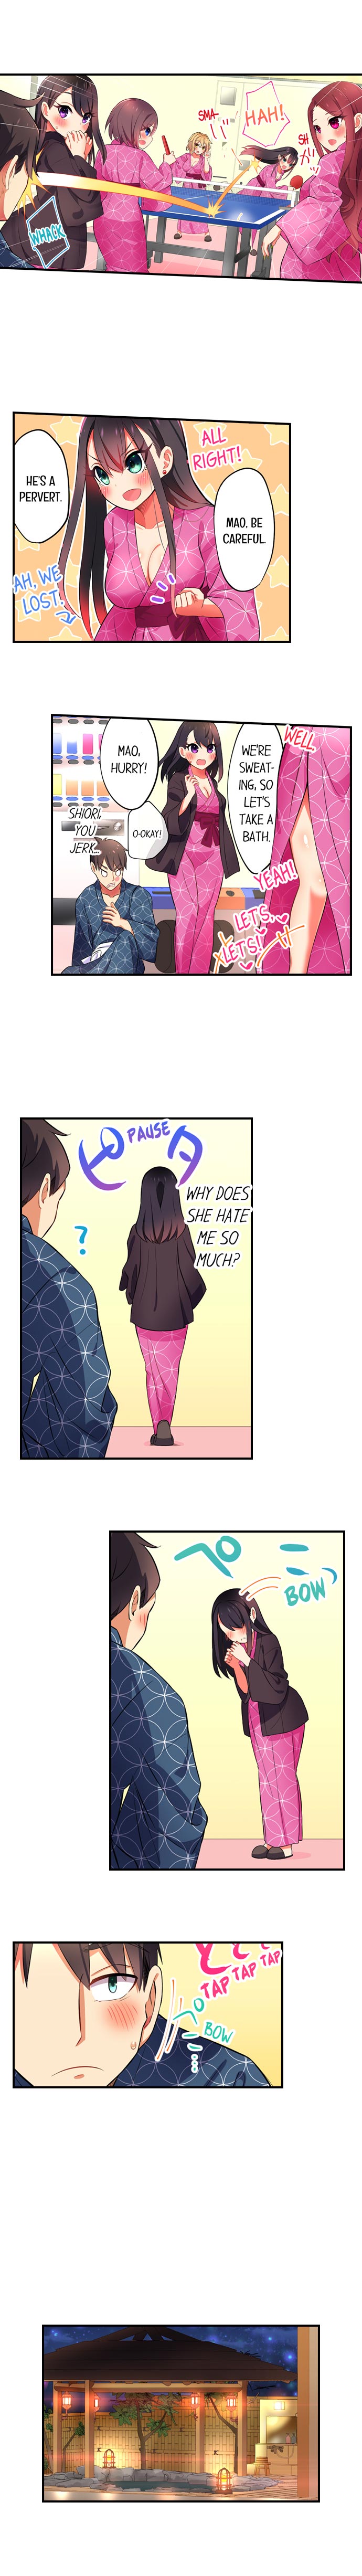 Fucking My Niece at the Girls’ Pajama Party - Chapter 16 Page 5